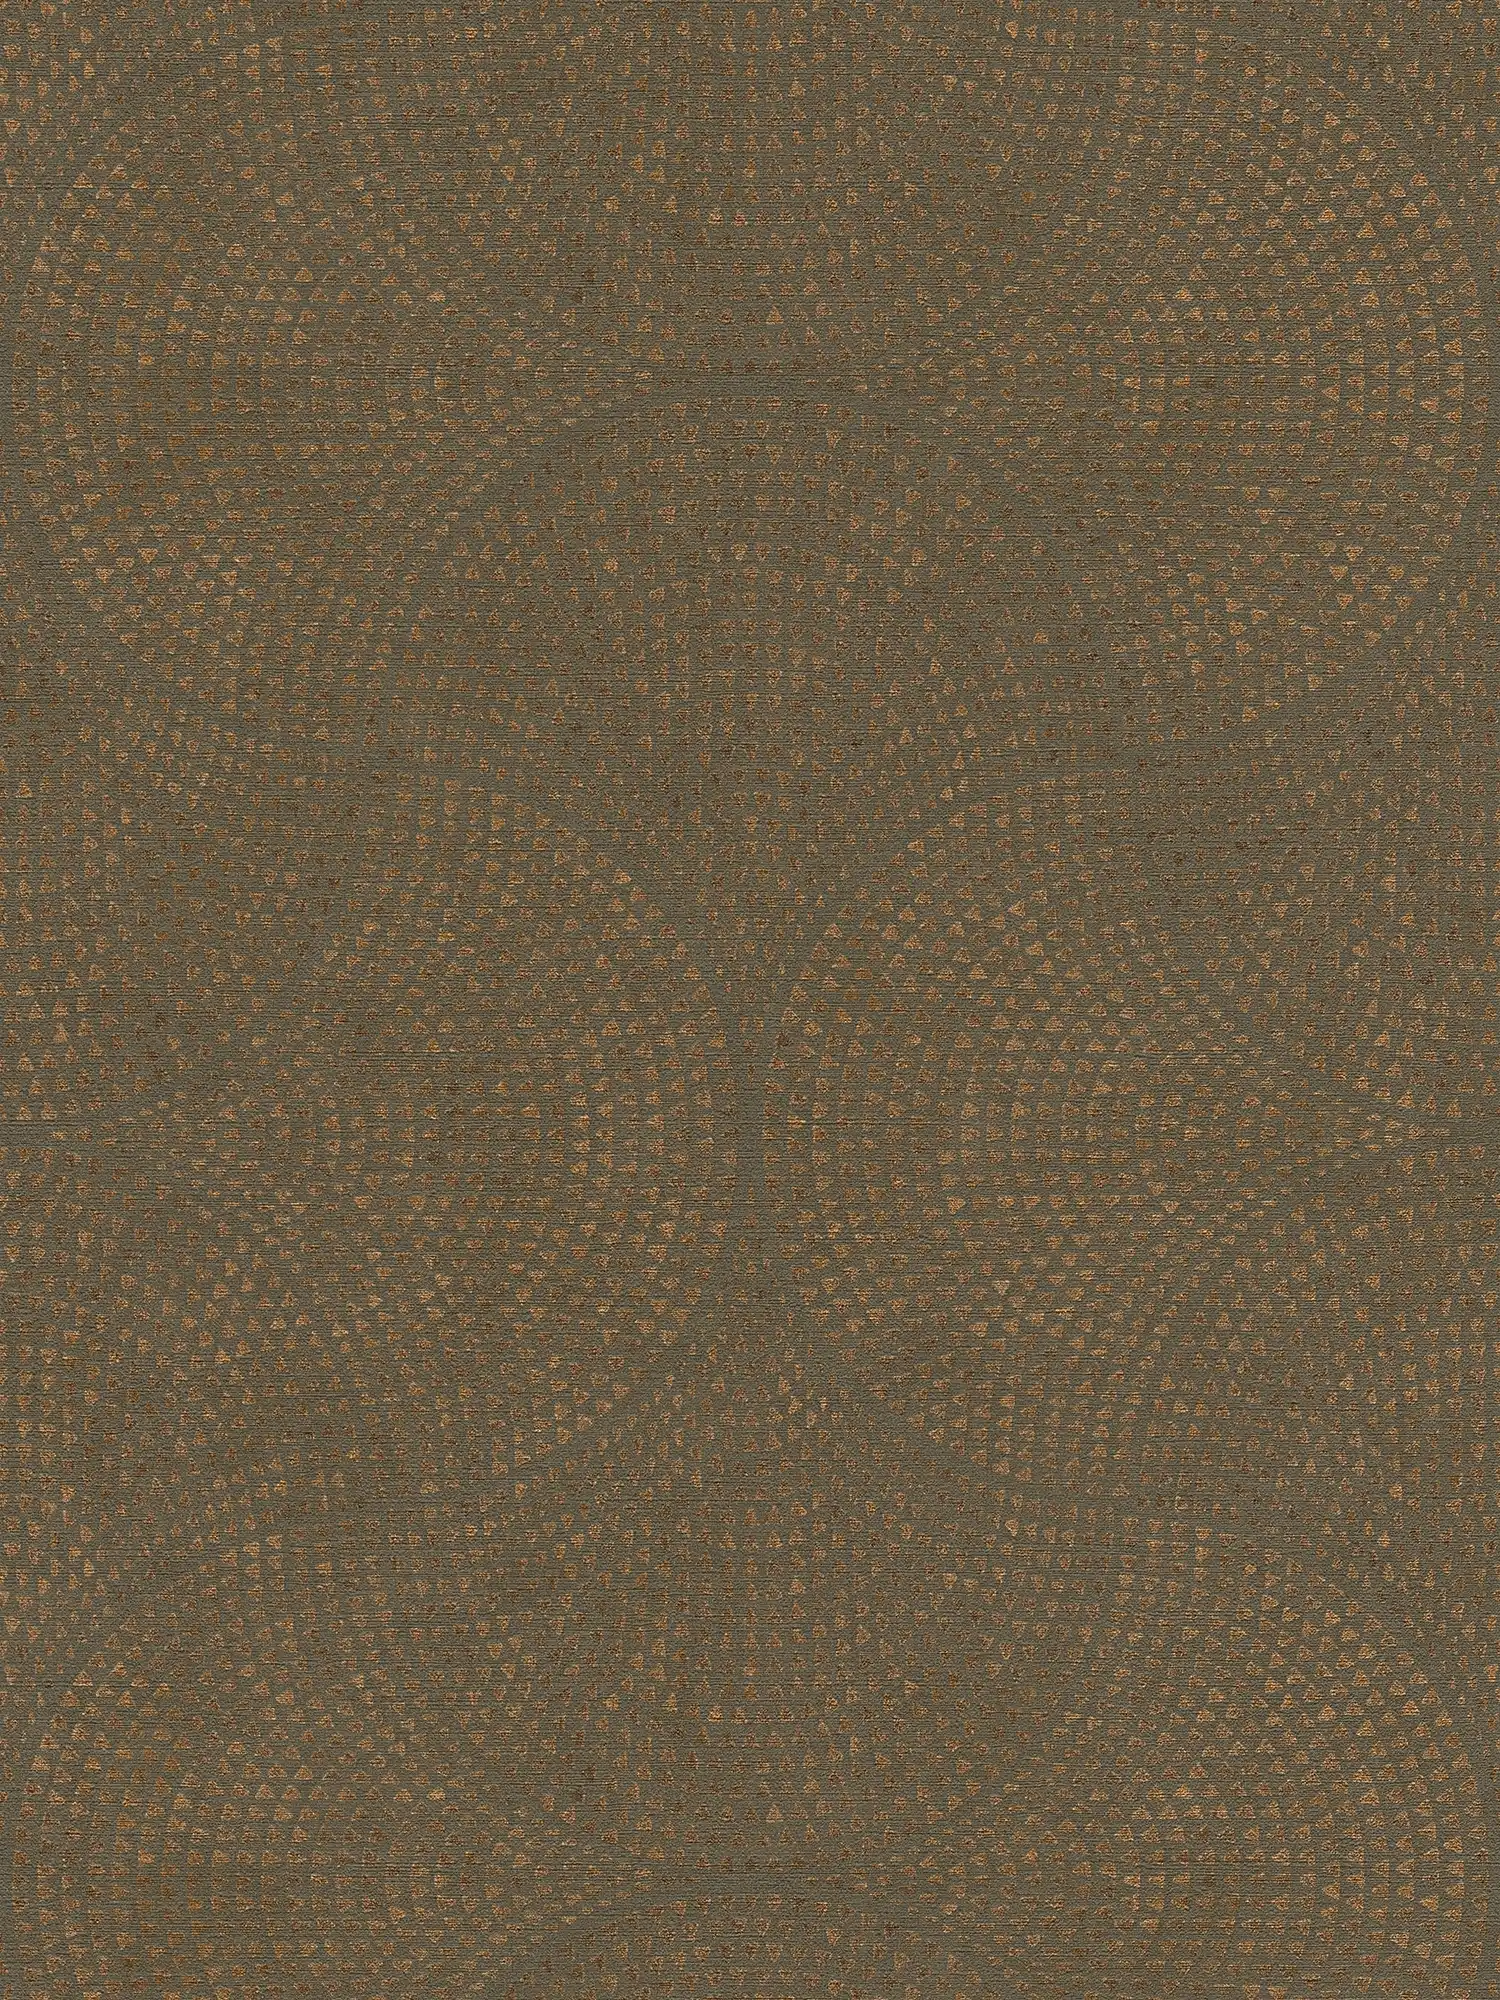 Brown wallpaper with copper pattern in mosaic style - brown, metallic
